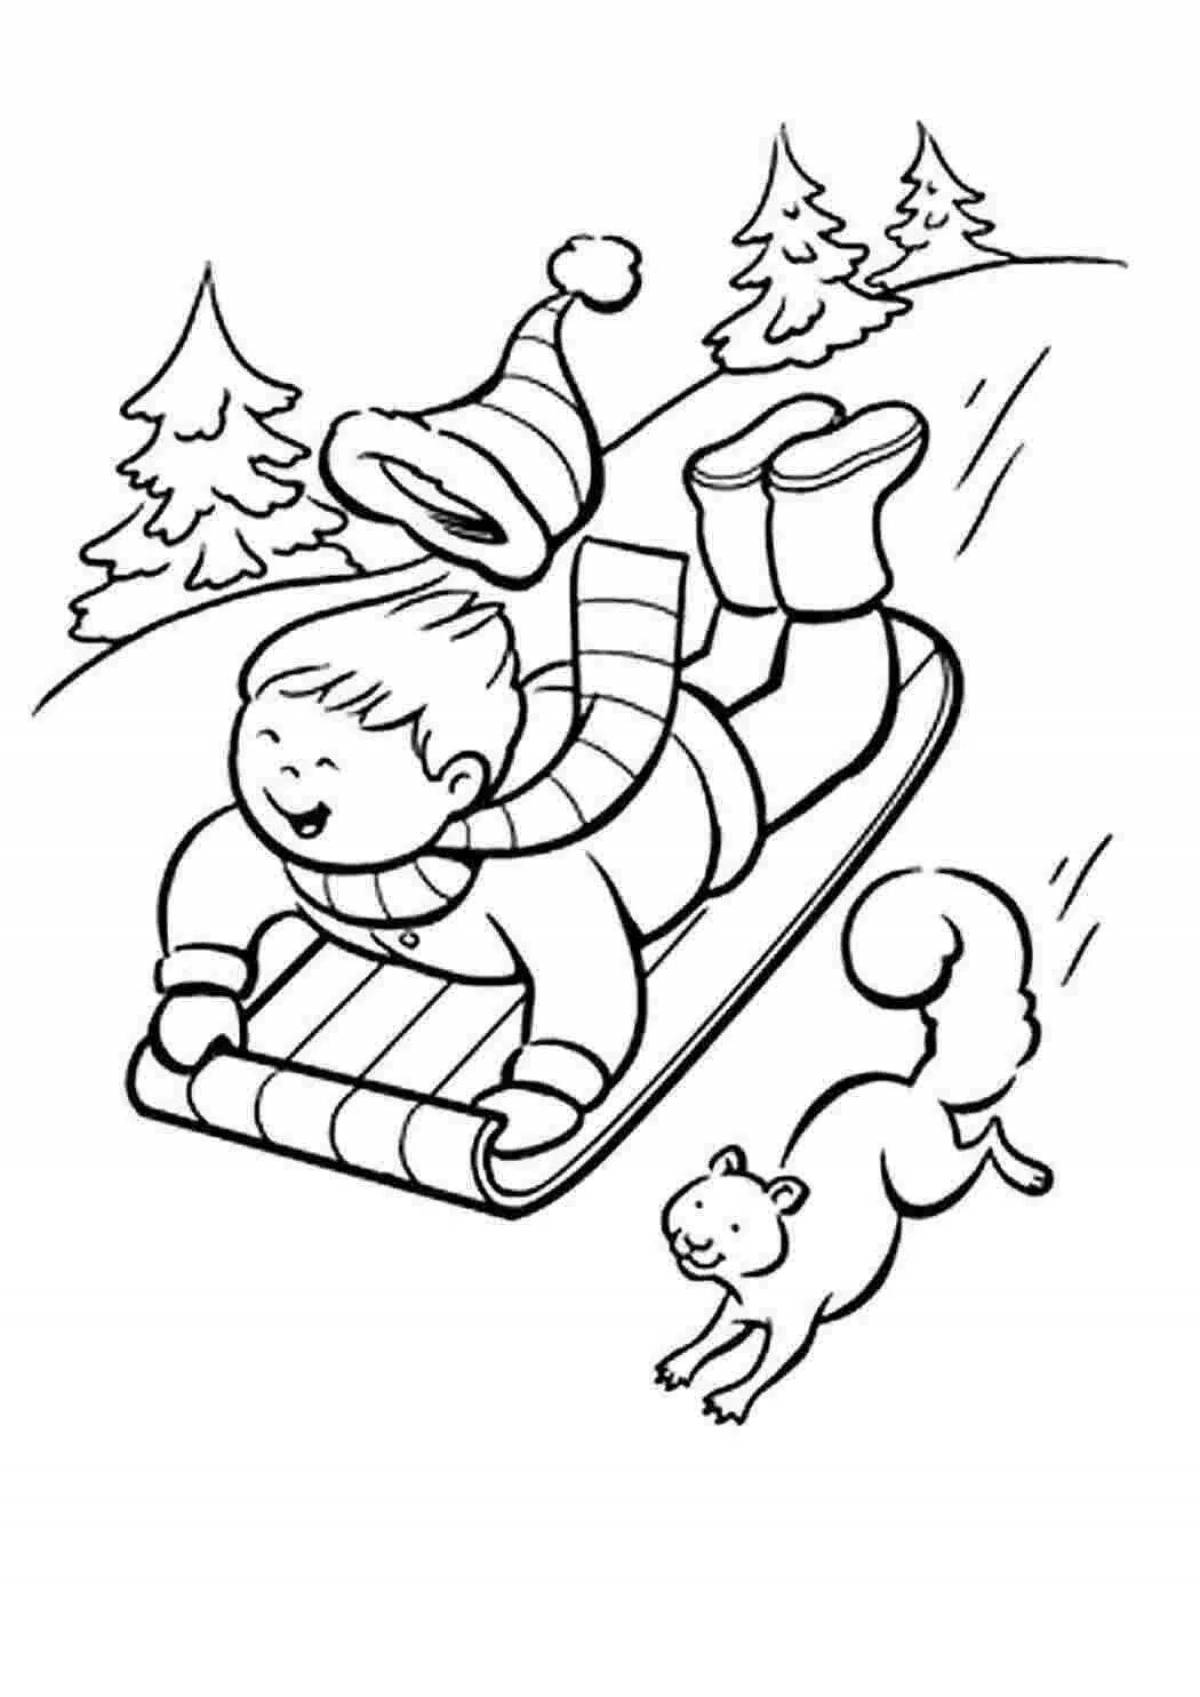 Coloring page excited child sledding